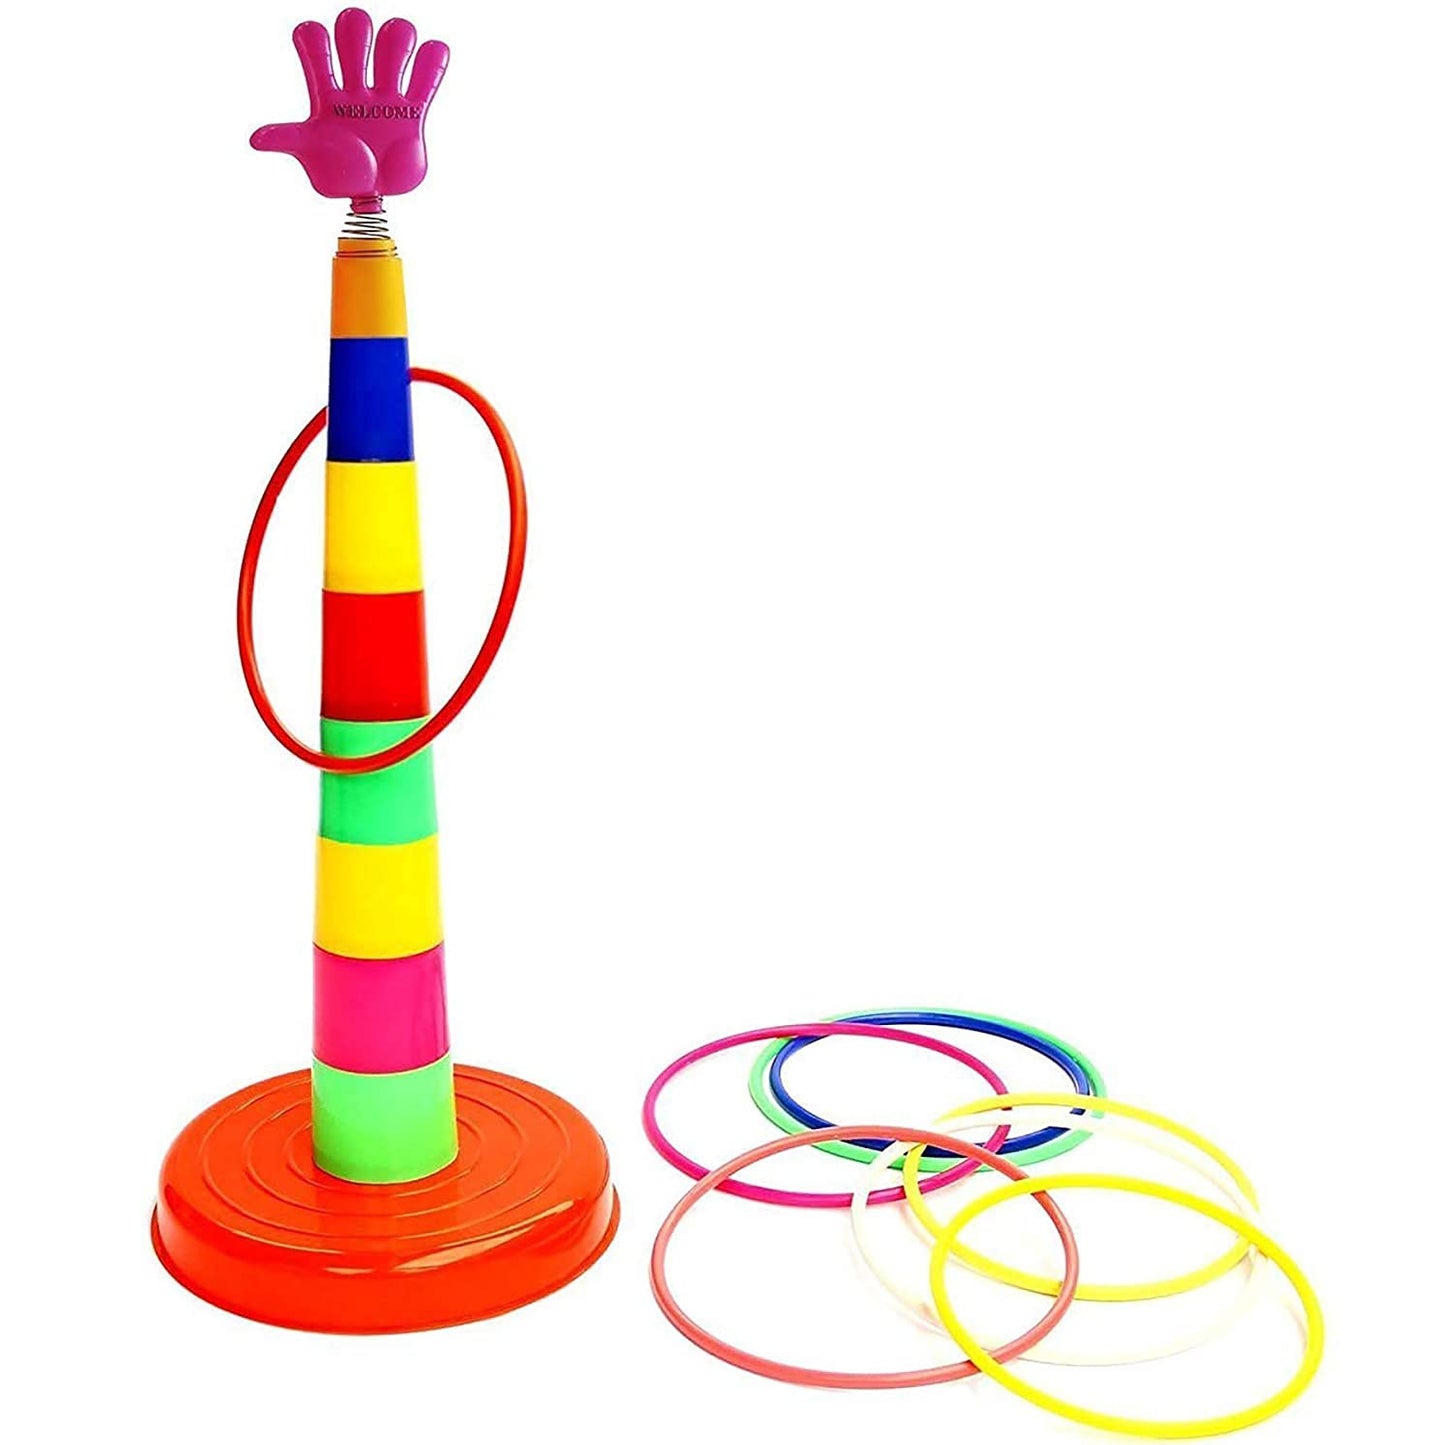 Hook And Ring Game, Ring Toss Game For Kids Ring Throw Game - Pack Of 1